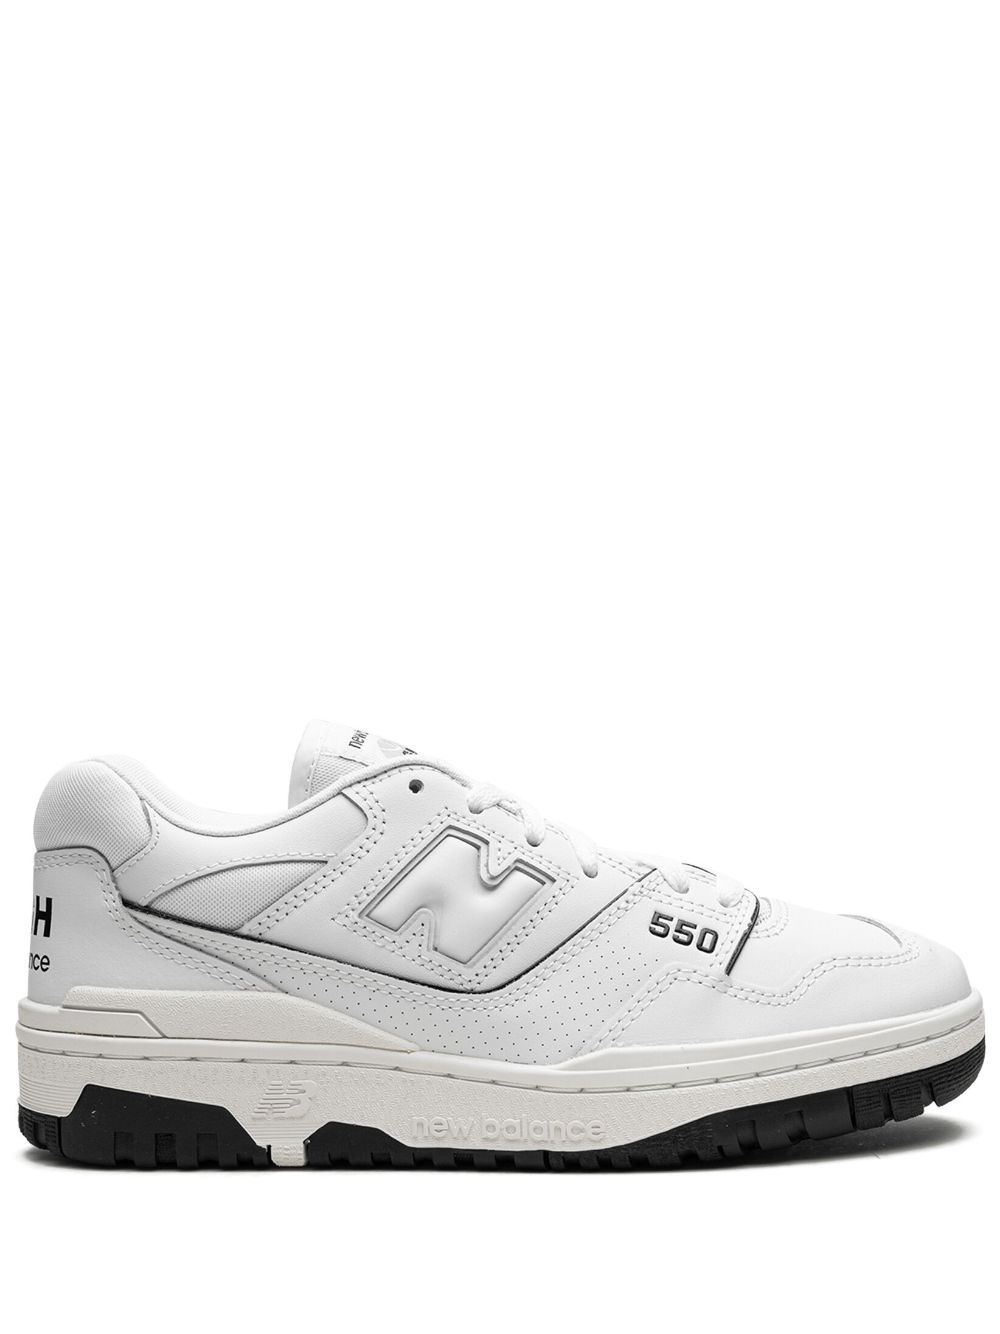 New Balance x CDG 550 low-top sneakers - White